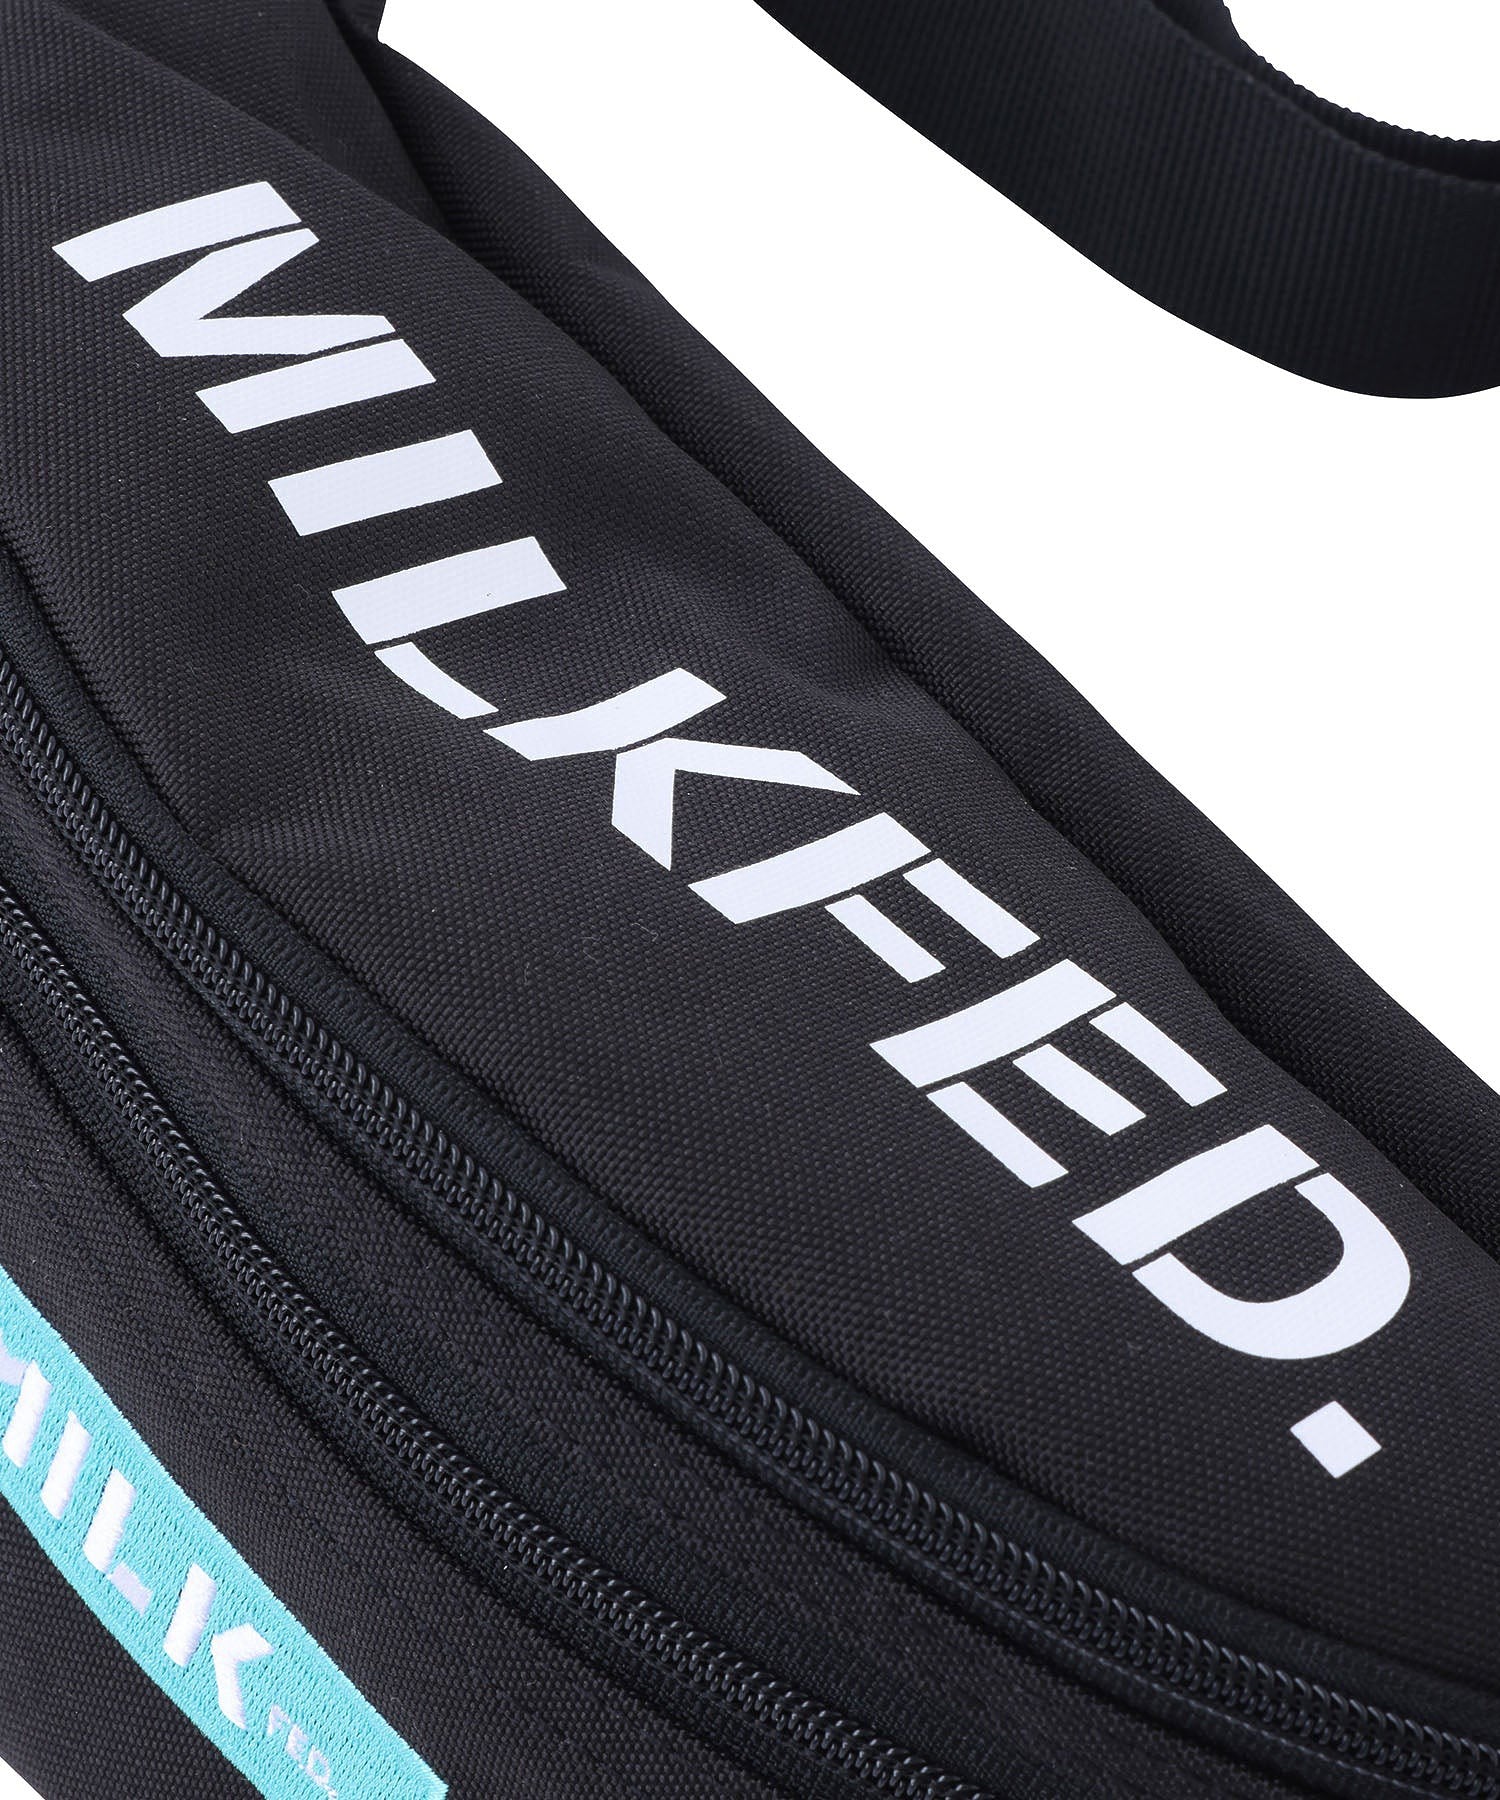 TOP LOGO FANNY PACK LIMITED COLOR MILKFED.